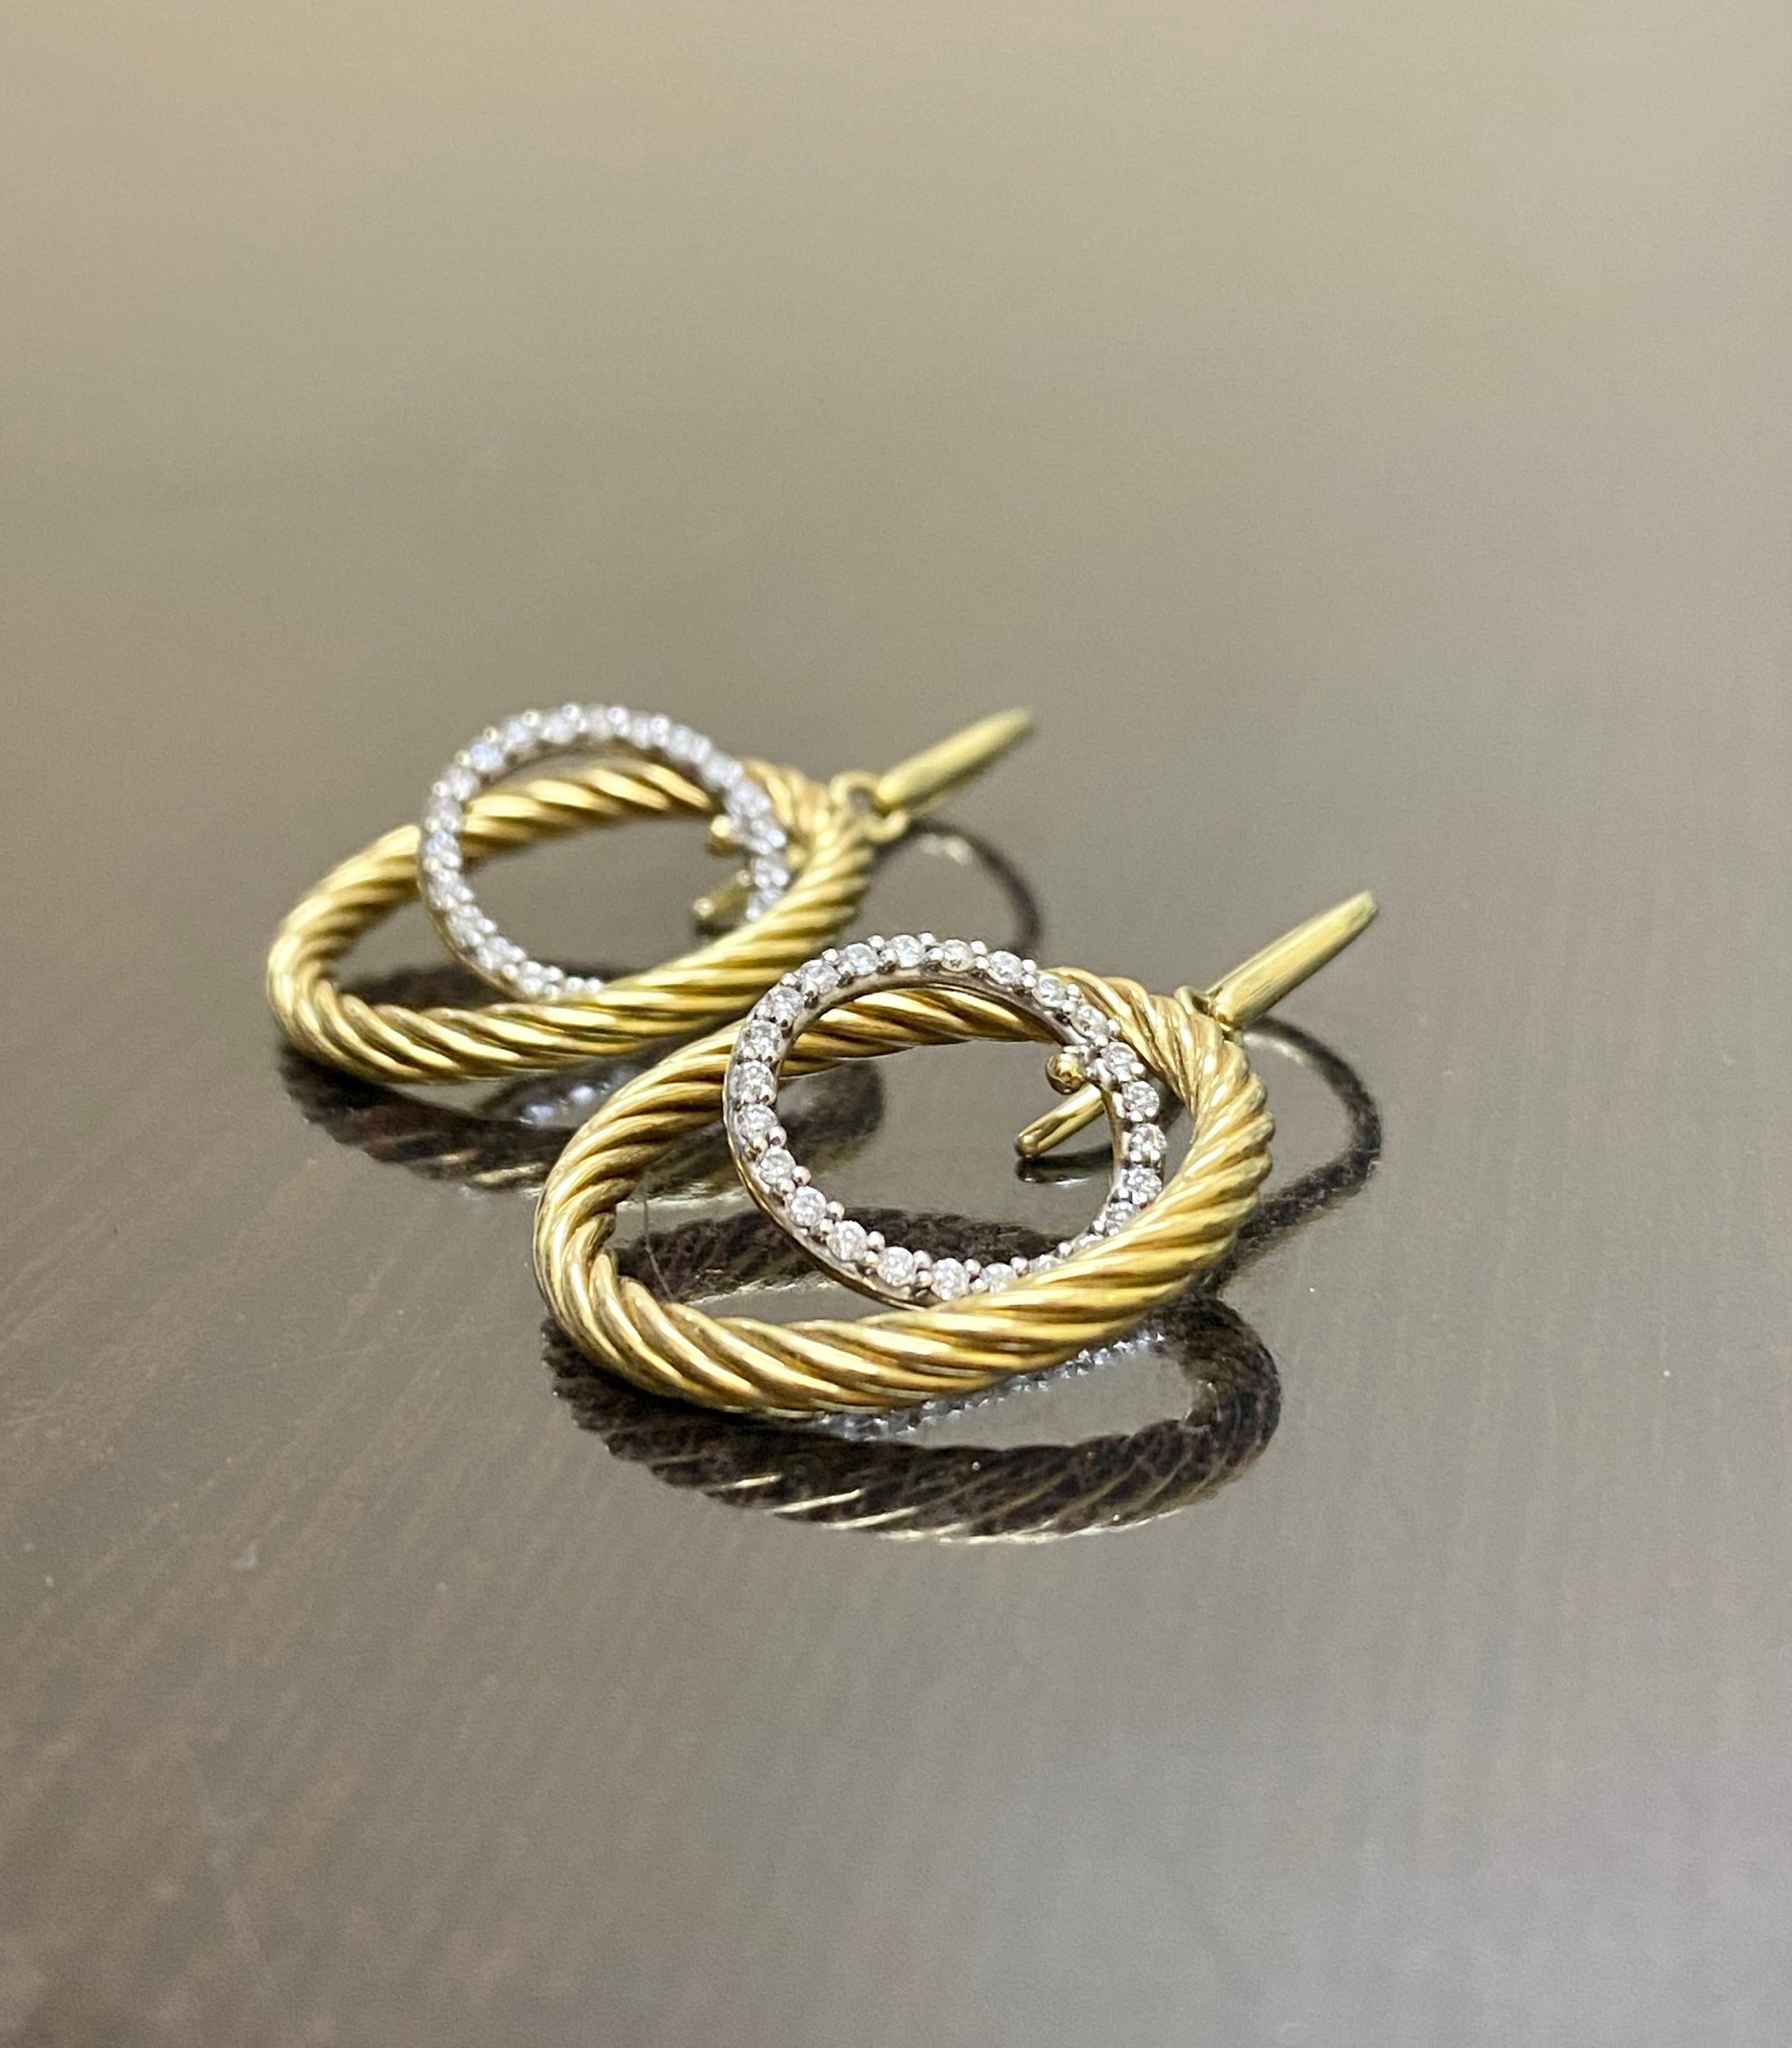 David Yurman 18K Yellow Gold Mobile Circle Cable Drop Diamond Earrings In Excellent Condition For Sale In Los Angeles, CA